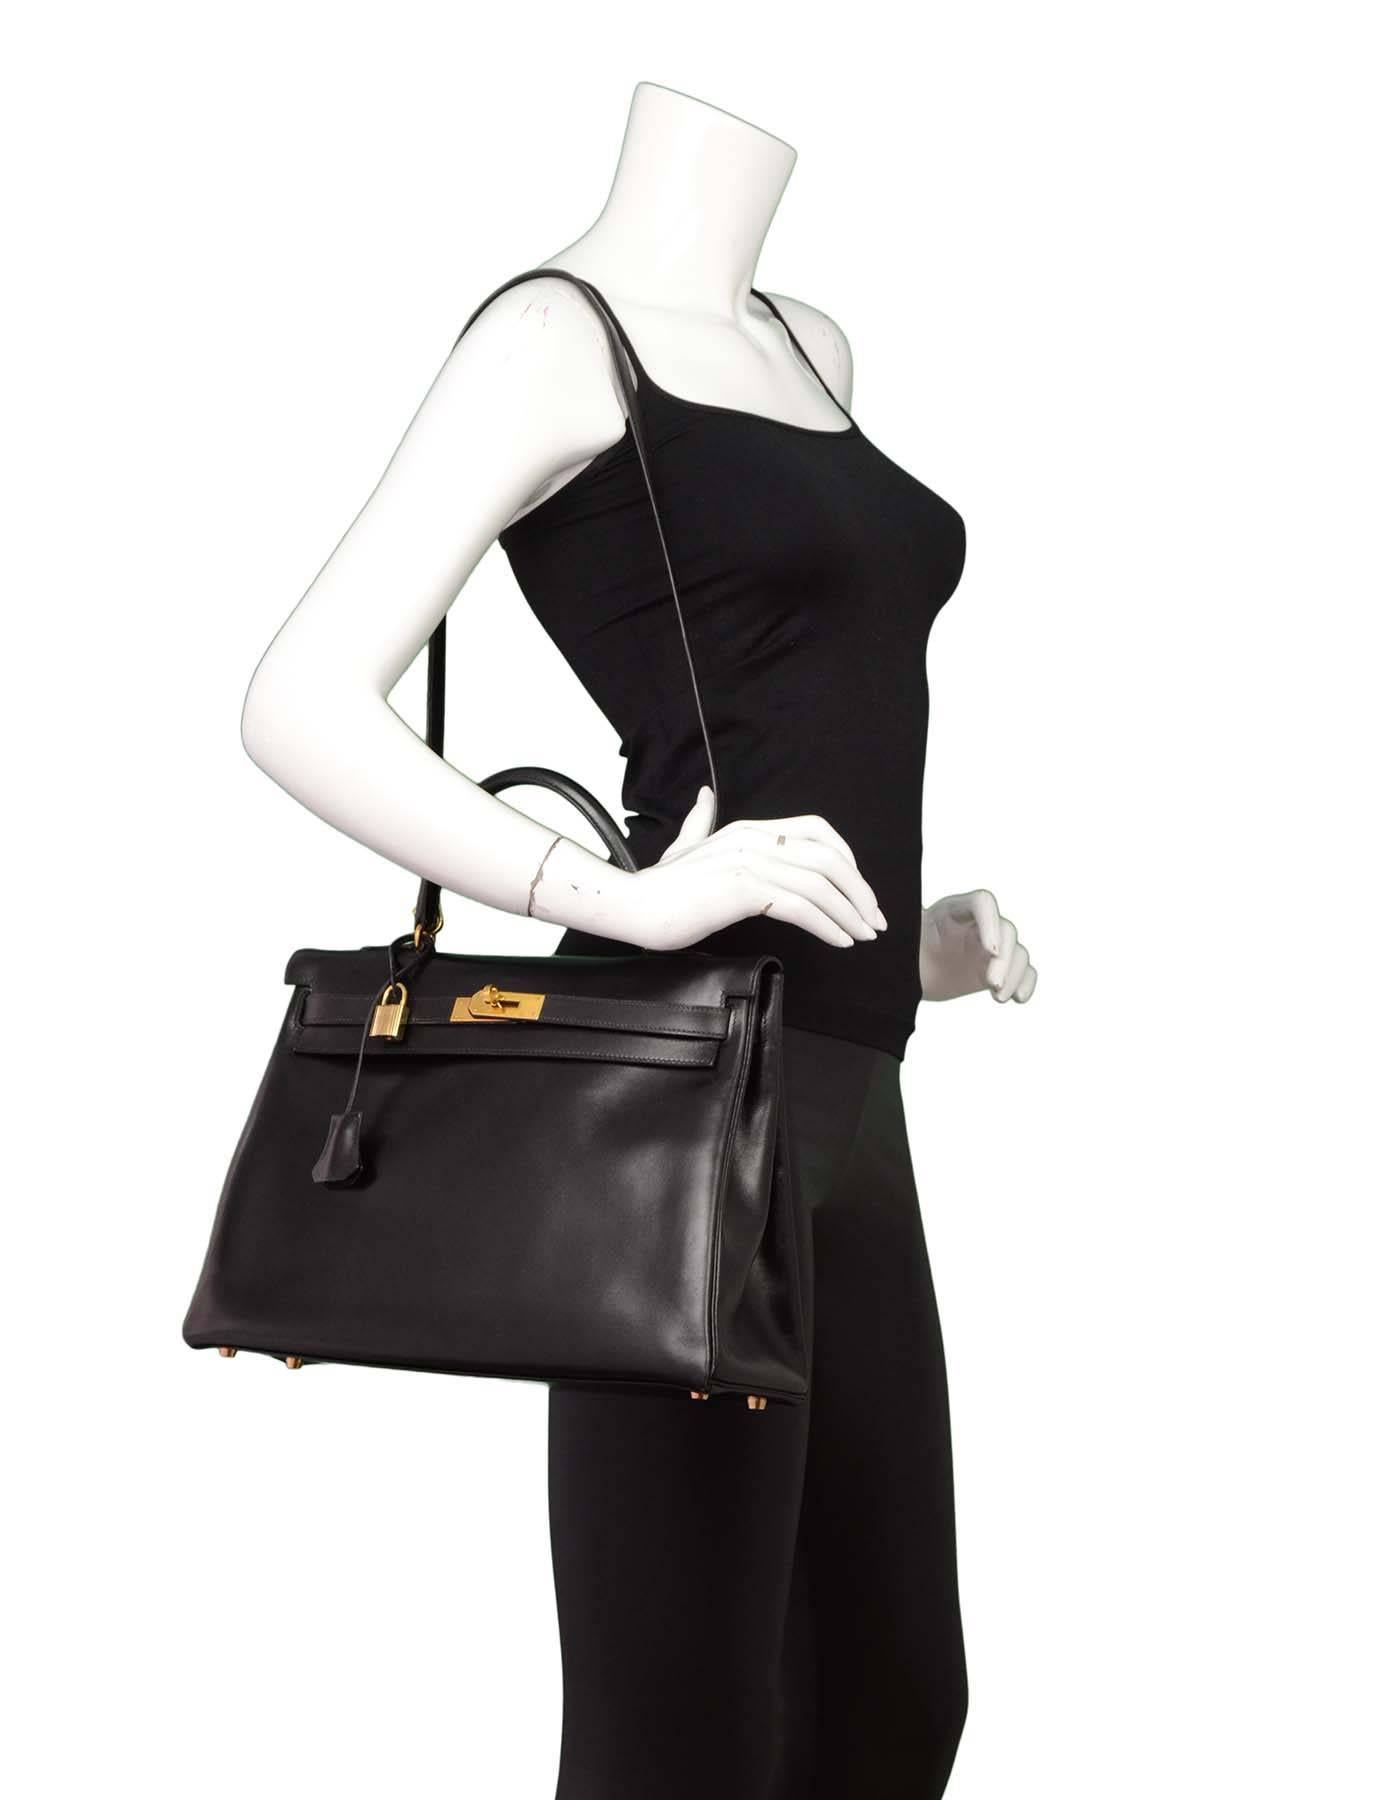 Hermes Vintage Black 35cm Kelly Retourne Bag
Features removable shoulder/crossbody strap

Made in: France
Year of Production: 1995
Color: Black
Hardware: Golstone
Materials: Box leather
Lining: Box leather
Closure/opening: Flap top with two